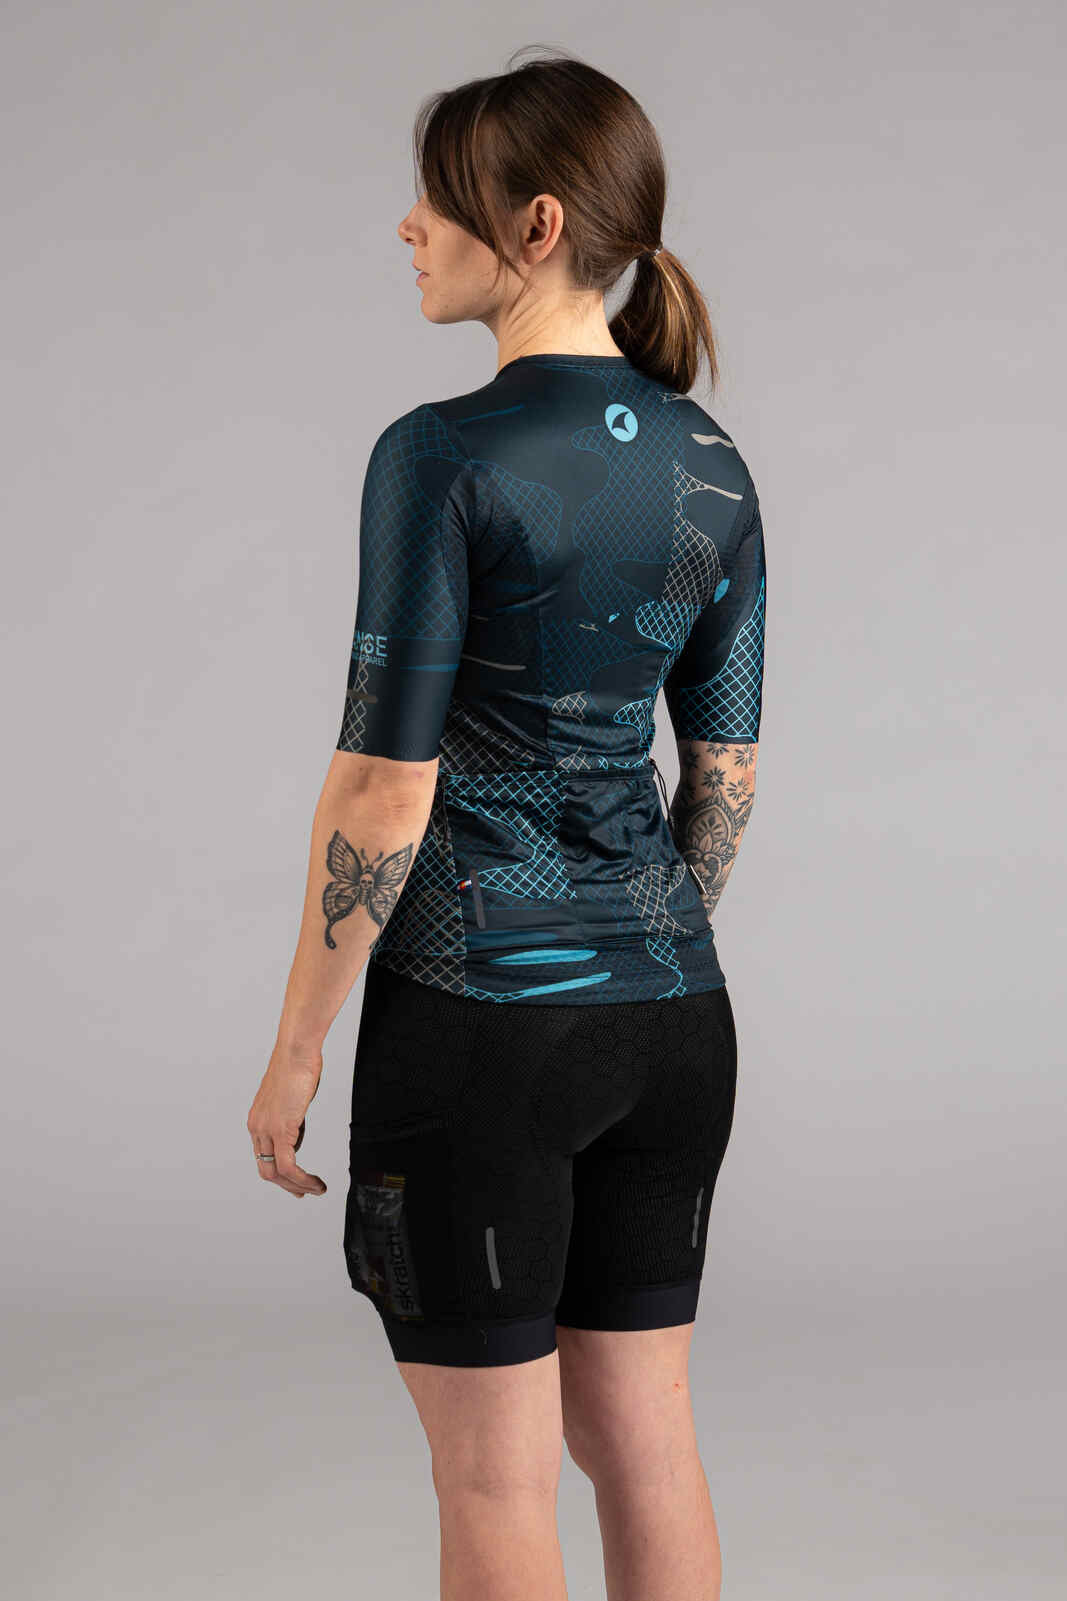 Women's Navy Blue Gravel Cycling Jersey - Back View